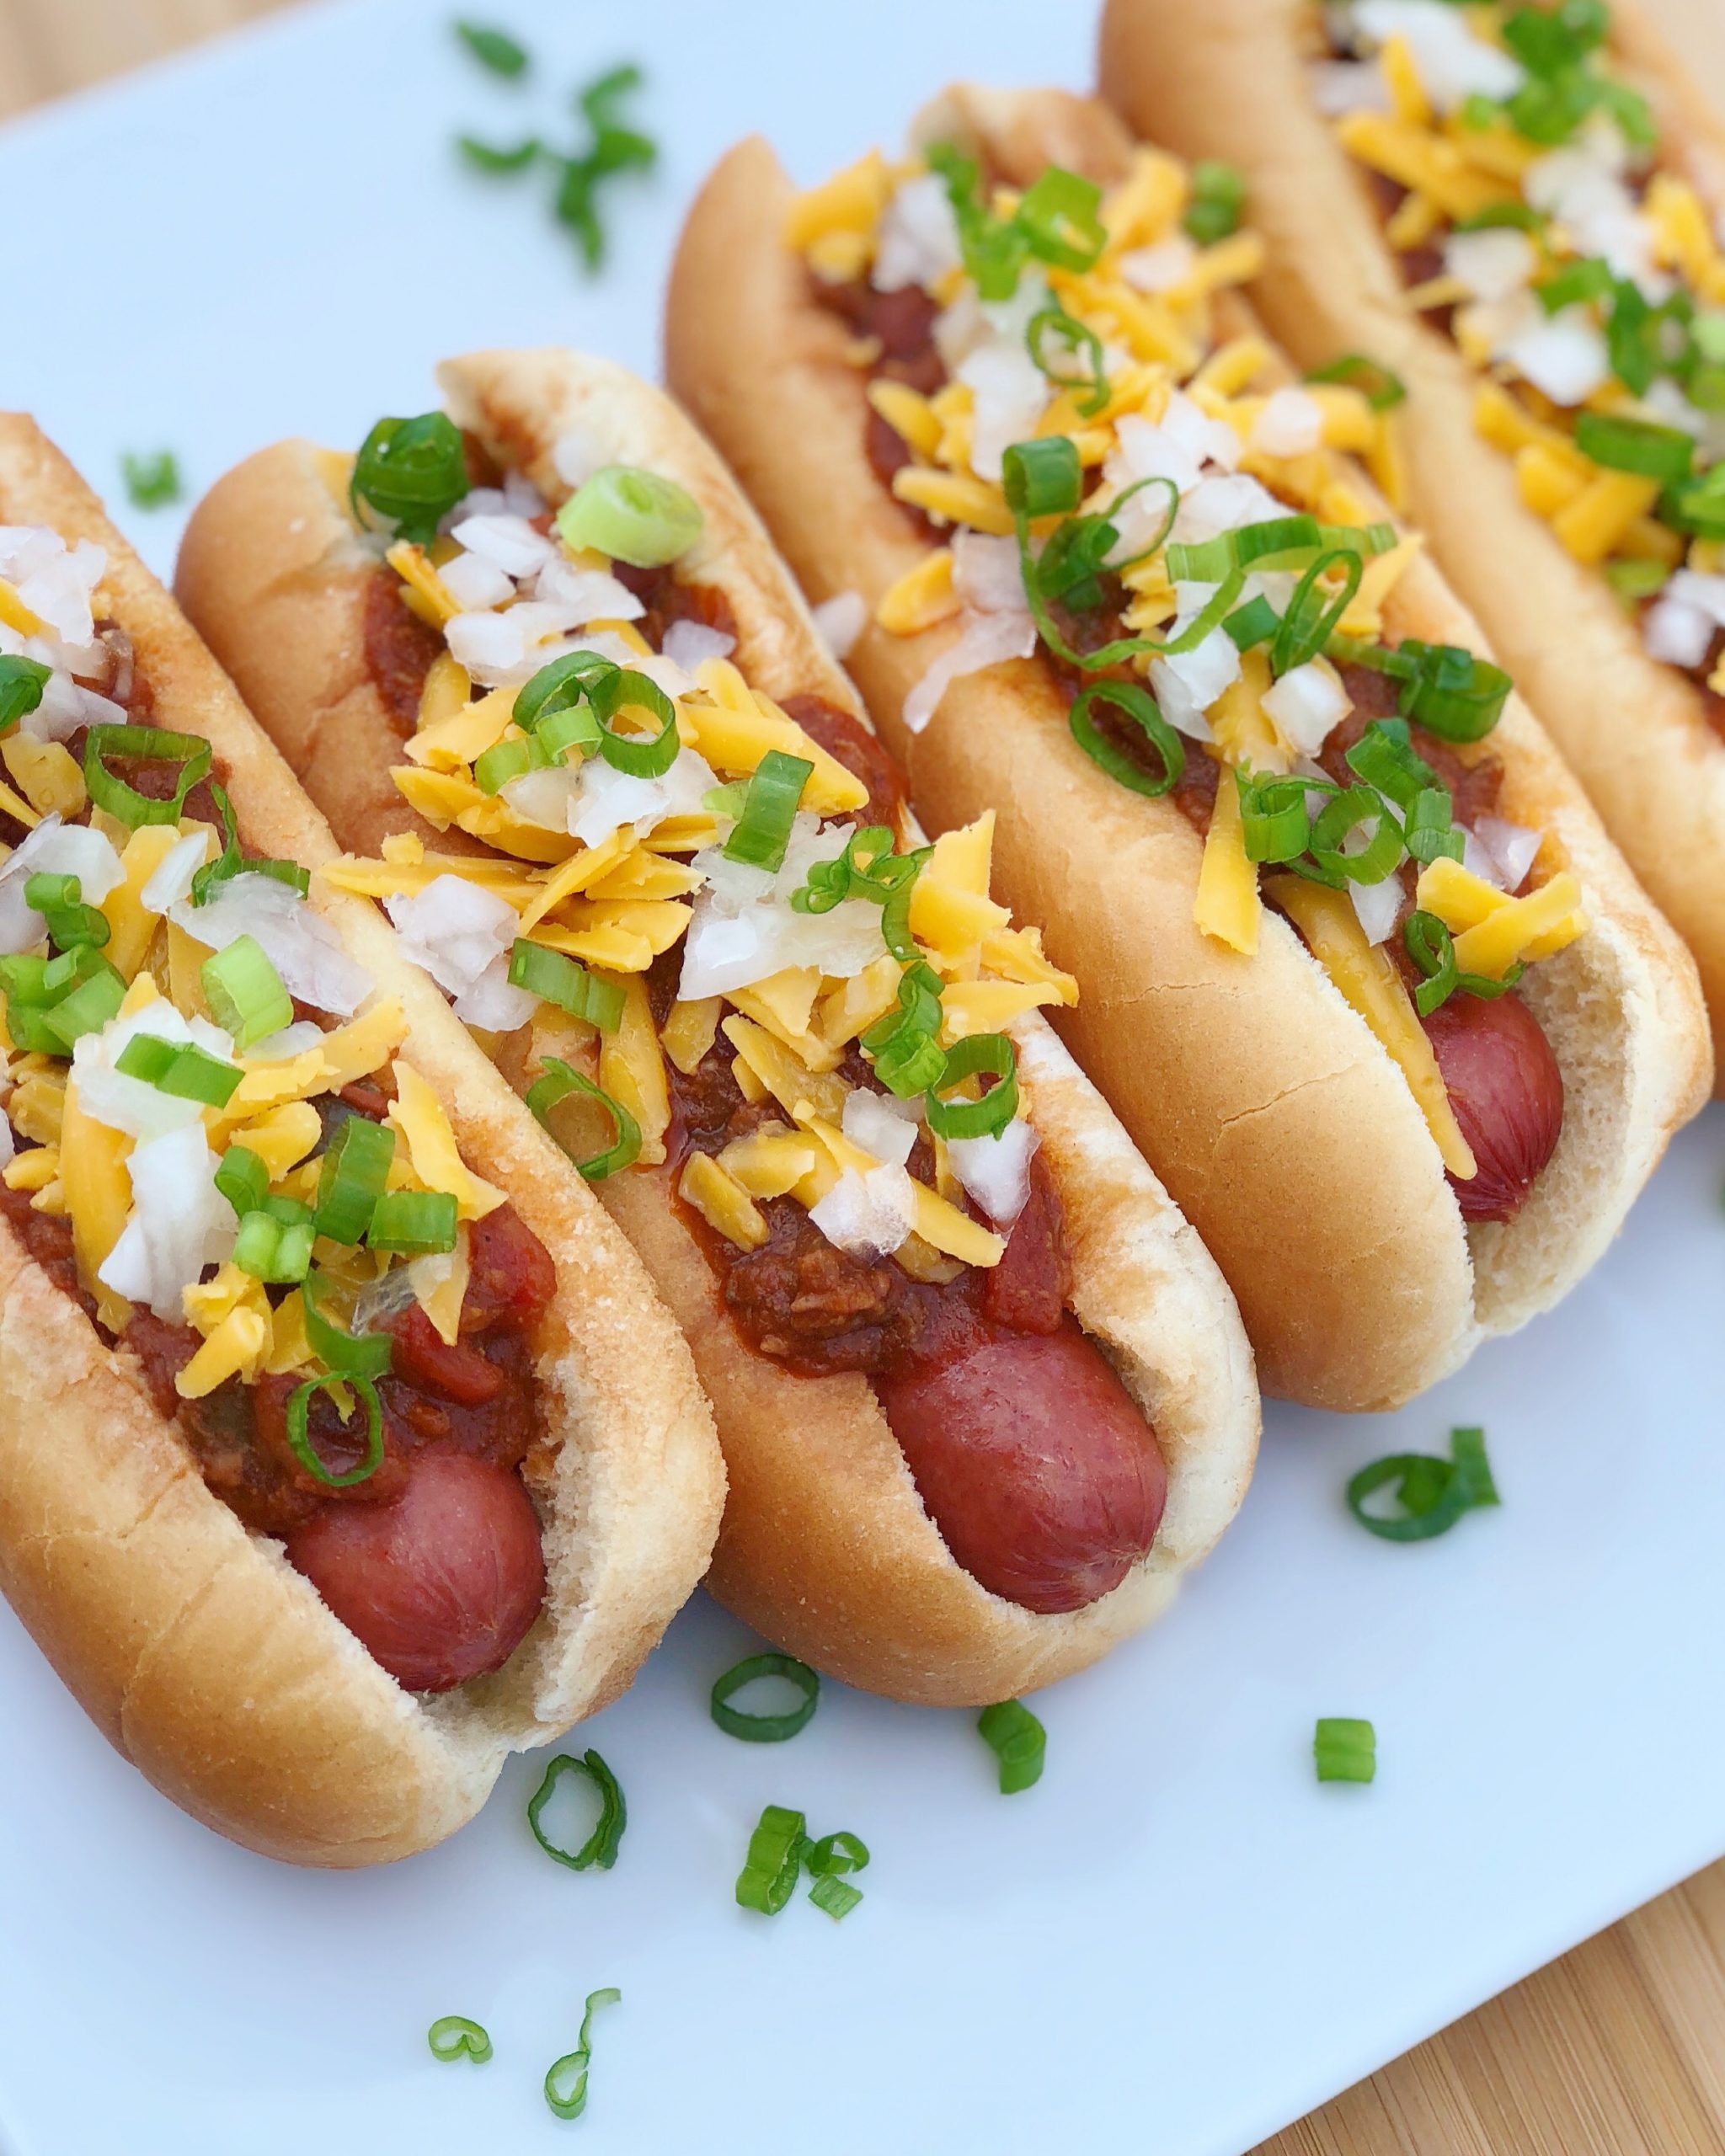 Dish of Chili Cheese Hot Dogs